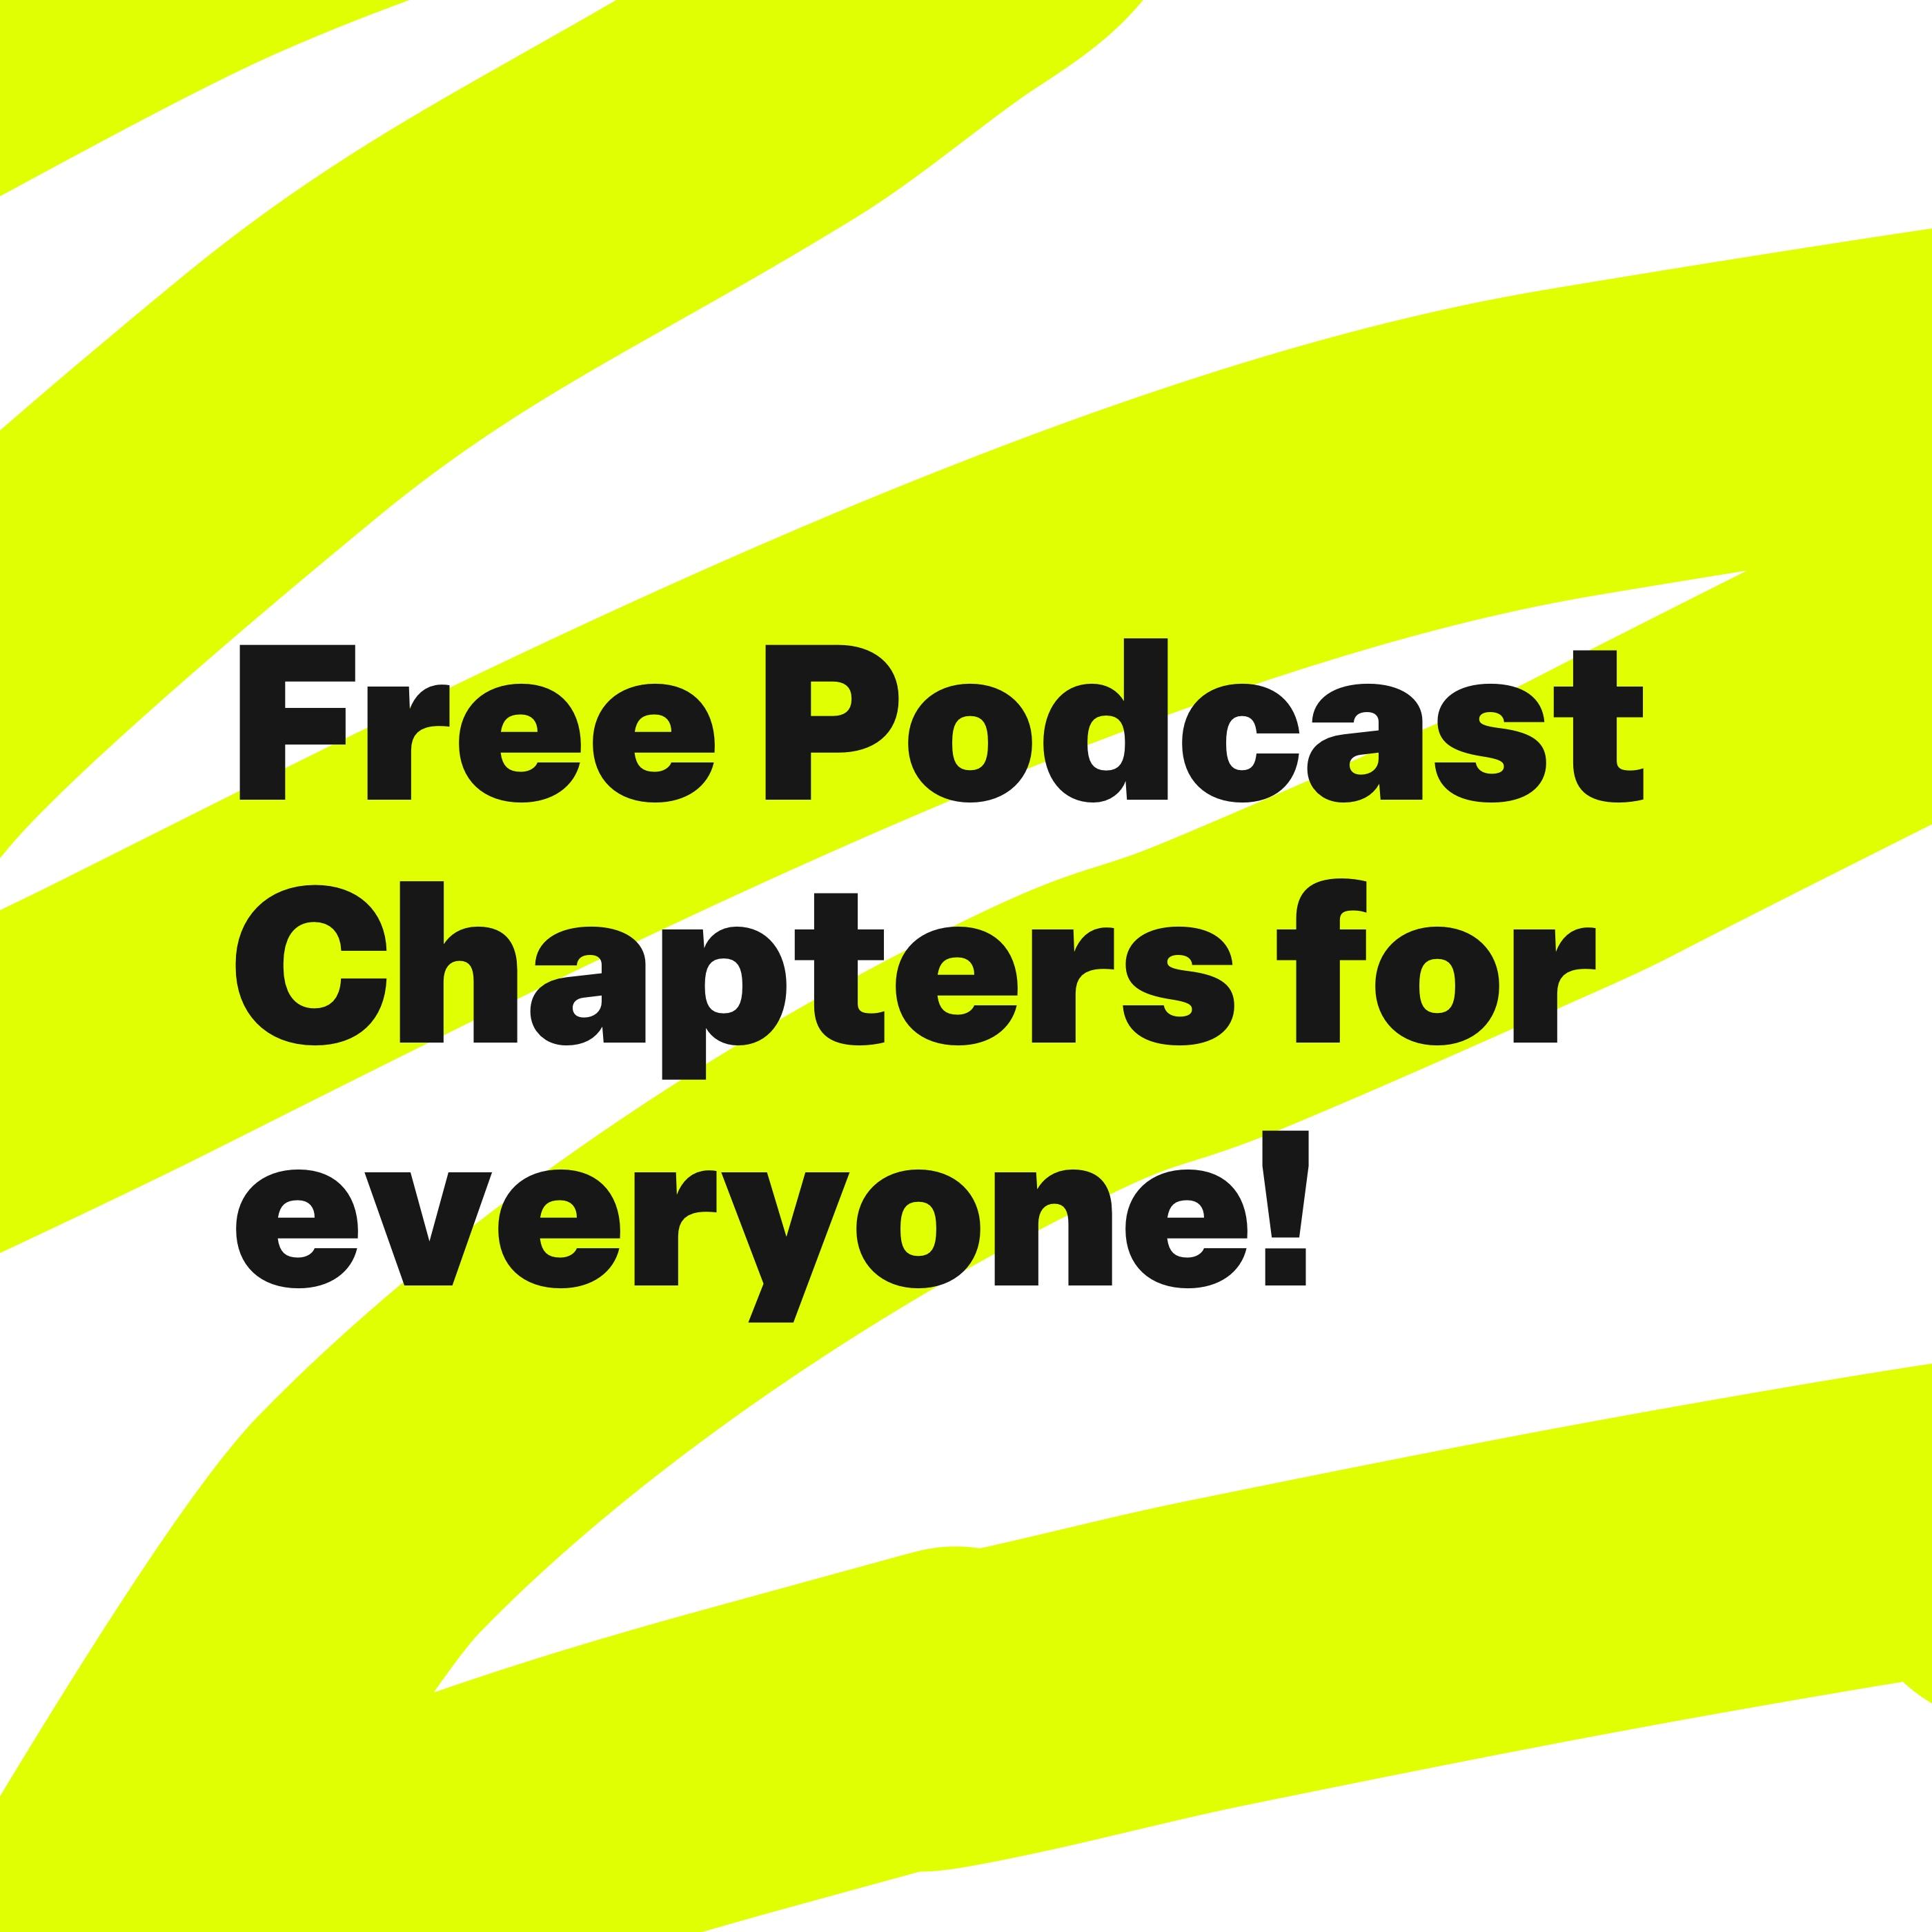 Artwork for Free Podcast Chapters for everyone!